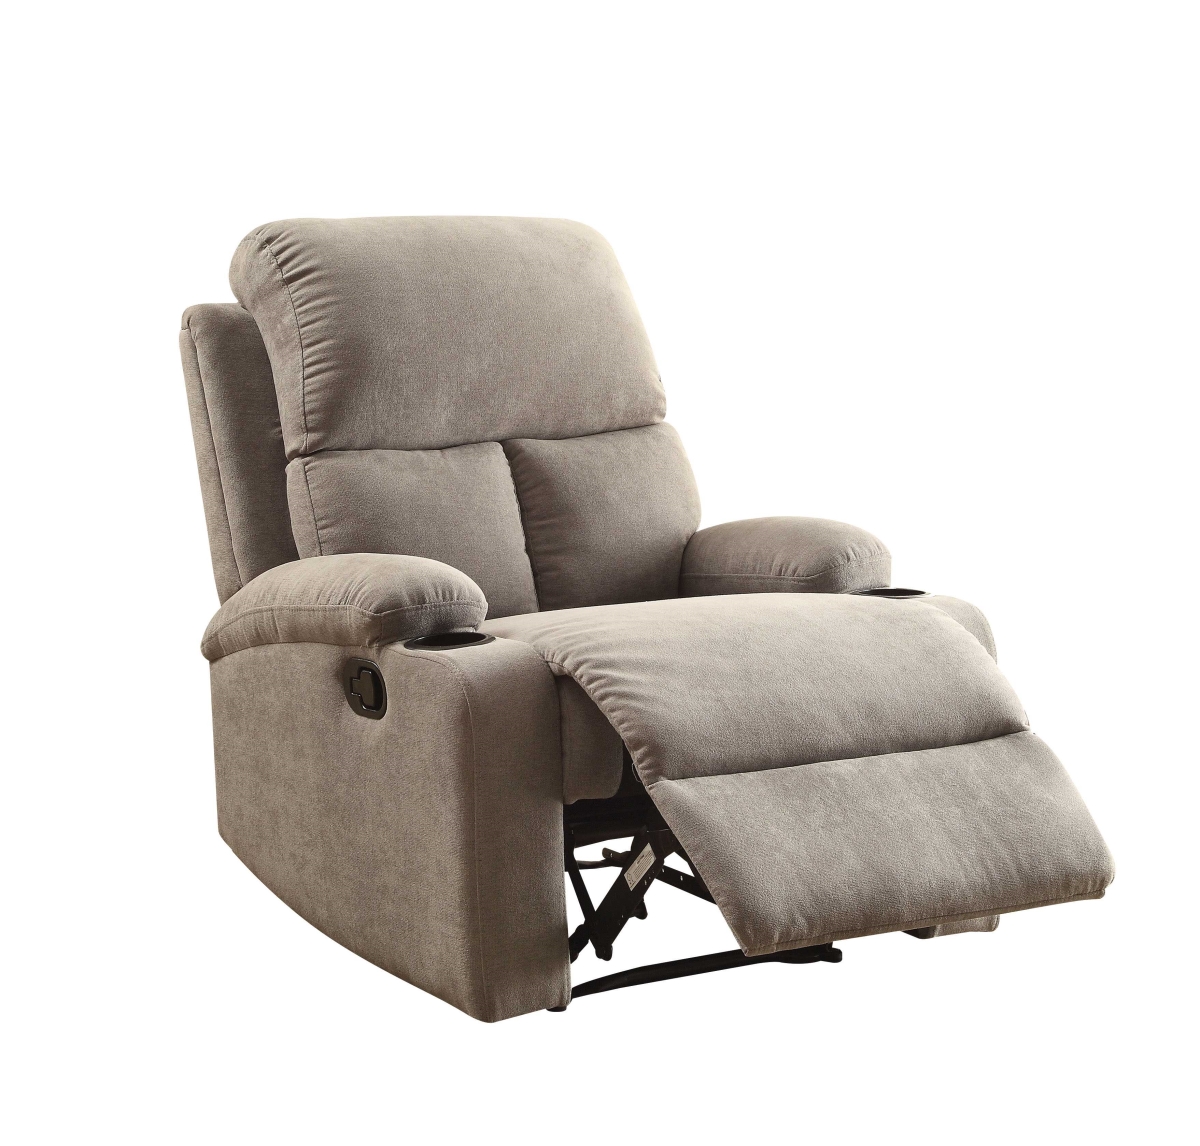 Home Roots Furniture 286183 39 X 32 X 37 In. Linen Fabric & Wood Frame Recliner - Gray